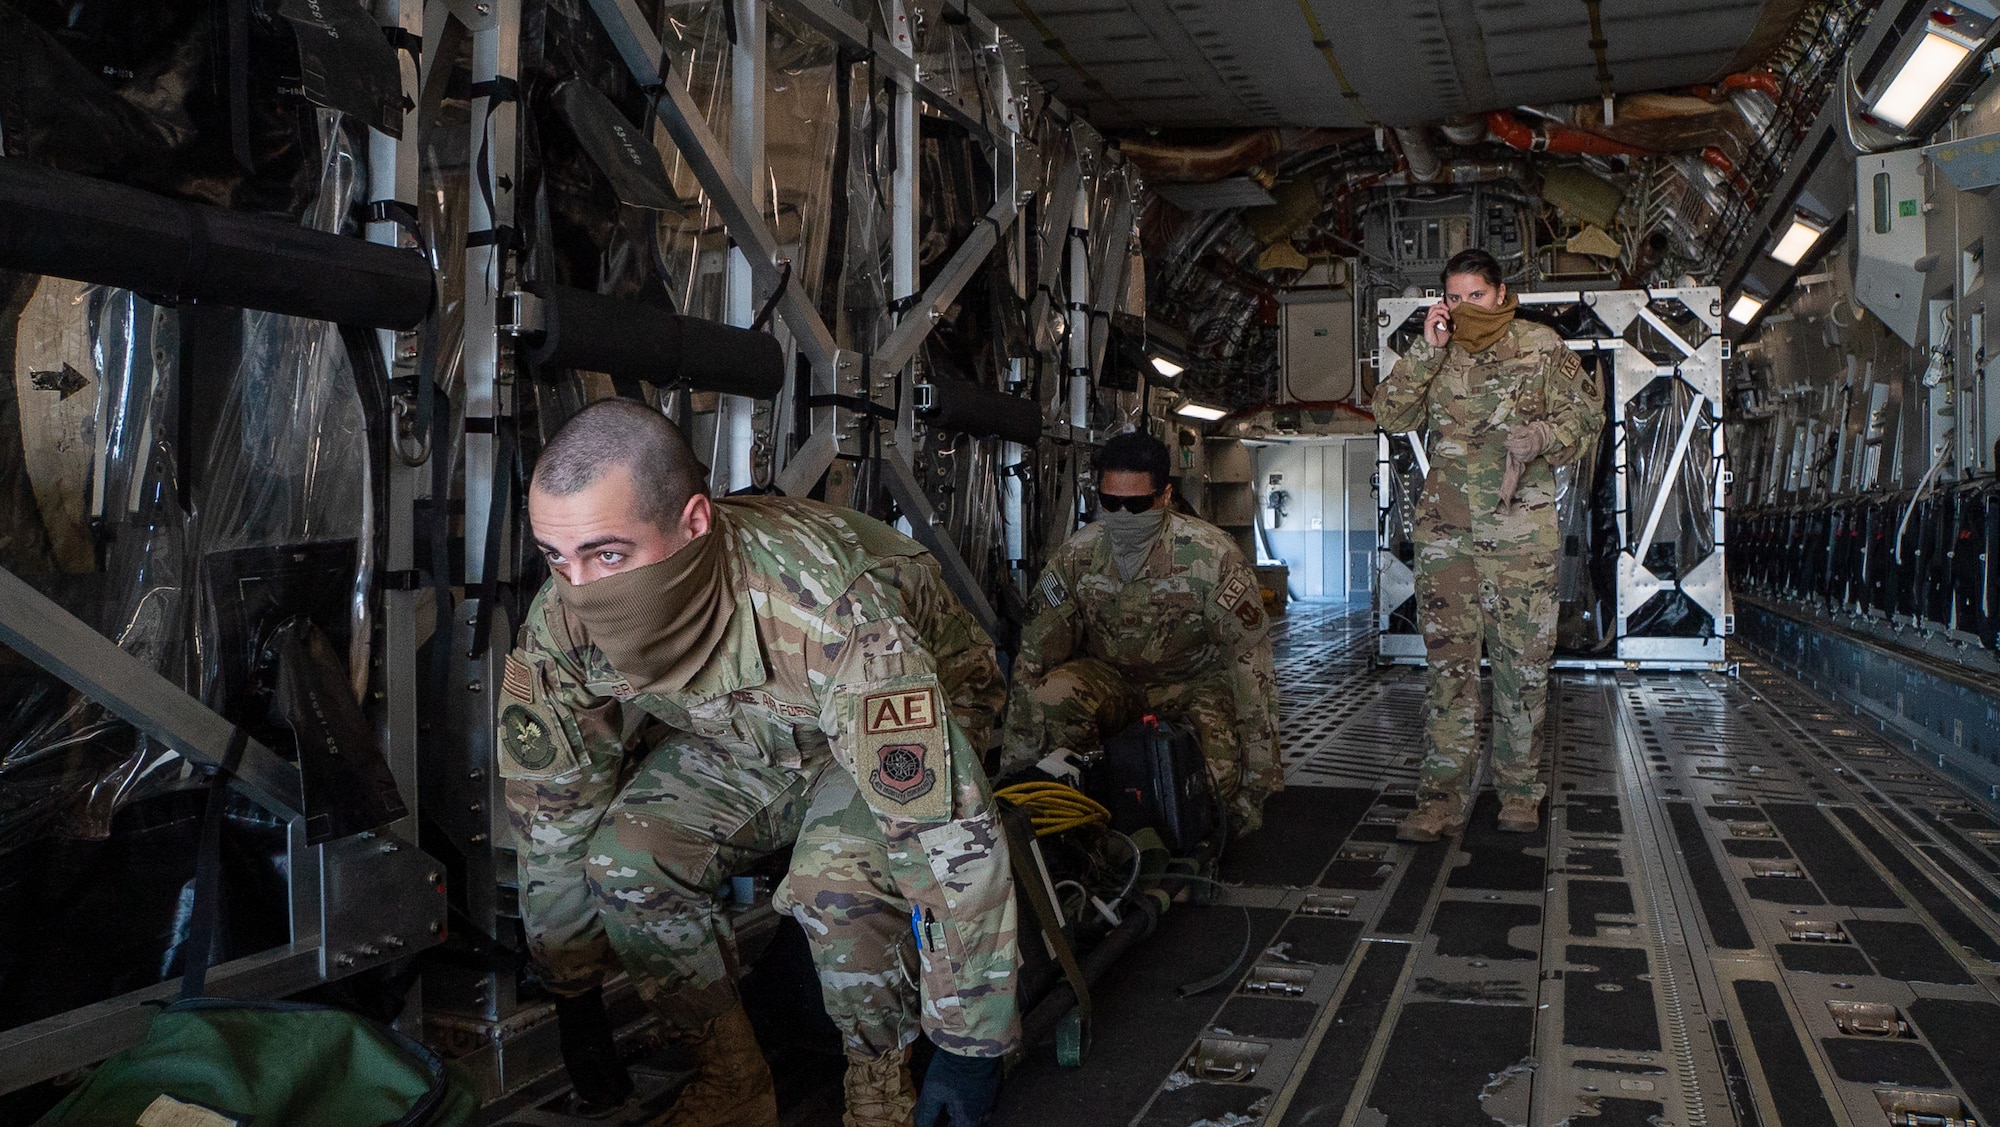 Airmen from the 521st Air Mobility Operations Wing support a Transport Isolation System operation at Ramstein Air Base, Germany, recently. Wing Airmen are postured to rapidly respond and support a broad range of missions transiting through Ramstein AB on any given day. (Courtesy photo)